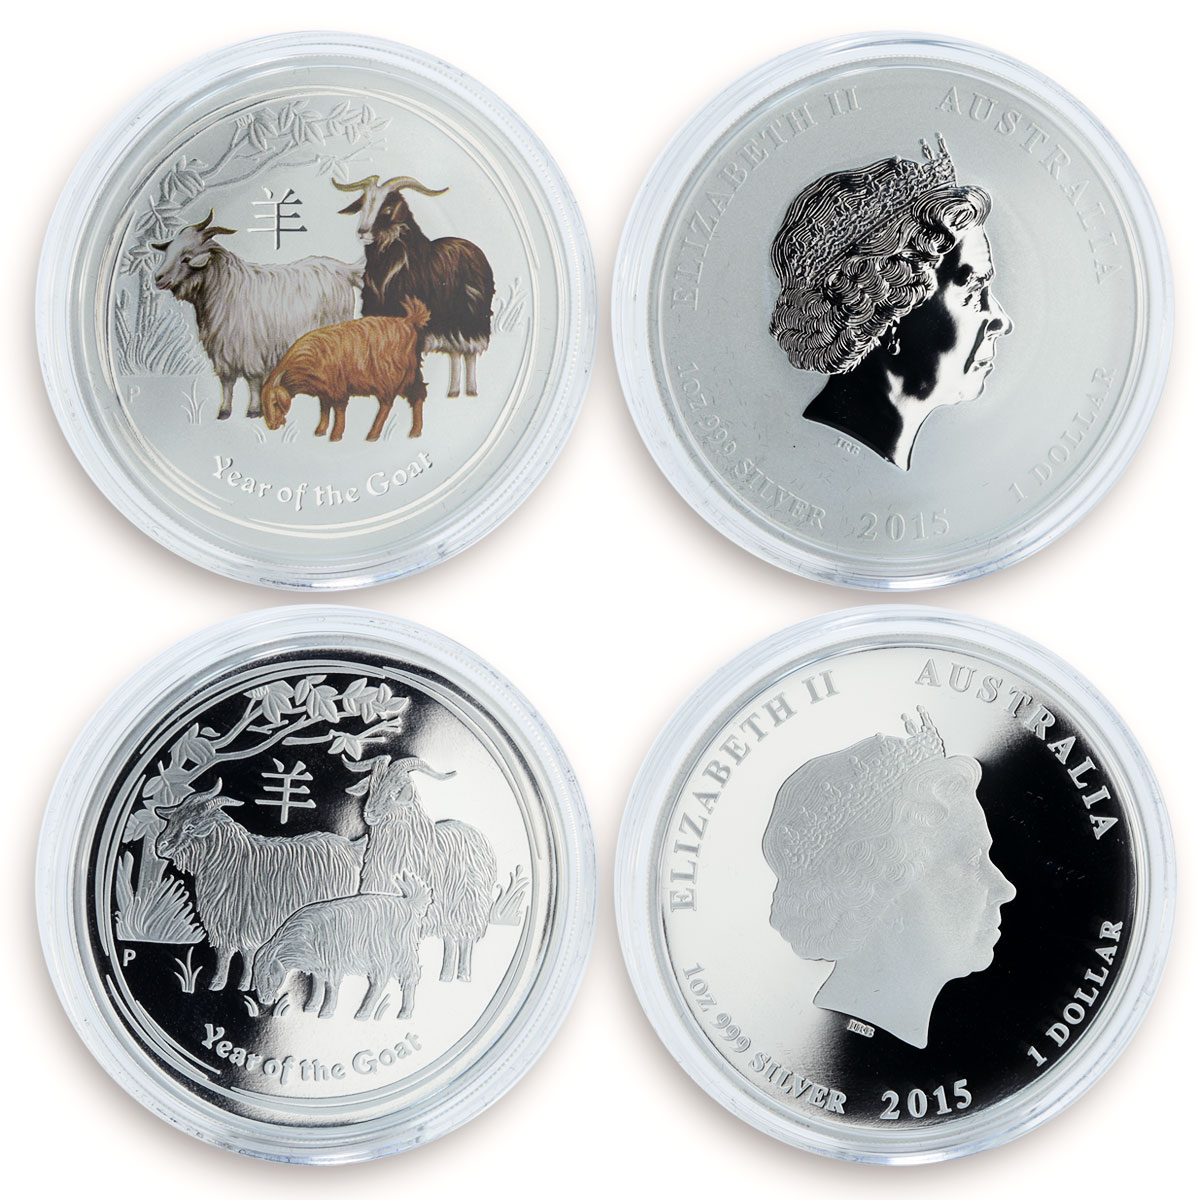 Australia Set of 4 Silver coins $1 Year of the Goat 2015 Series II Lunar